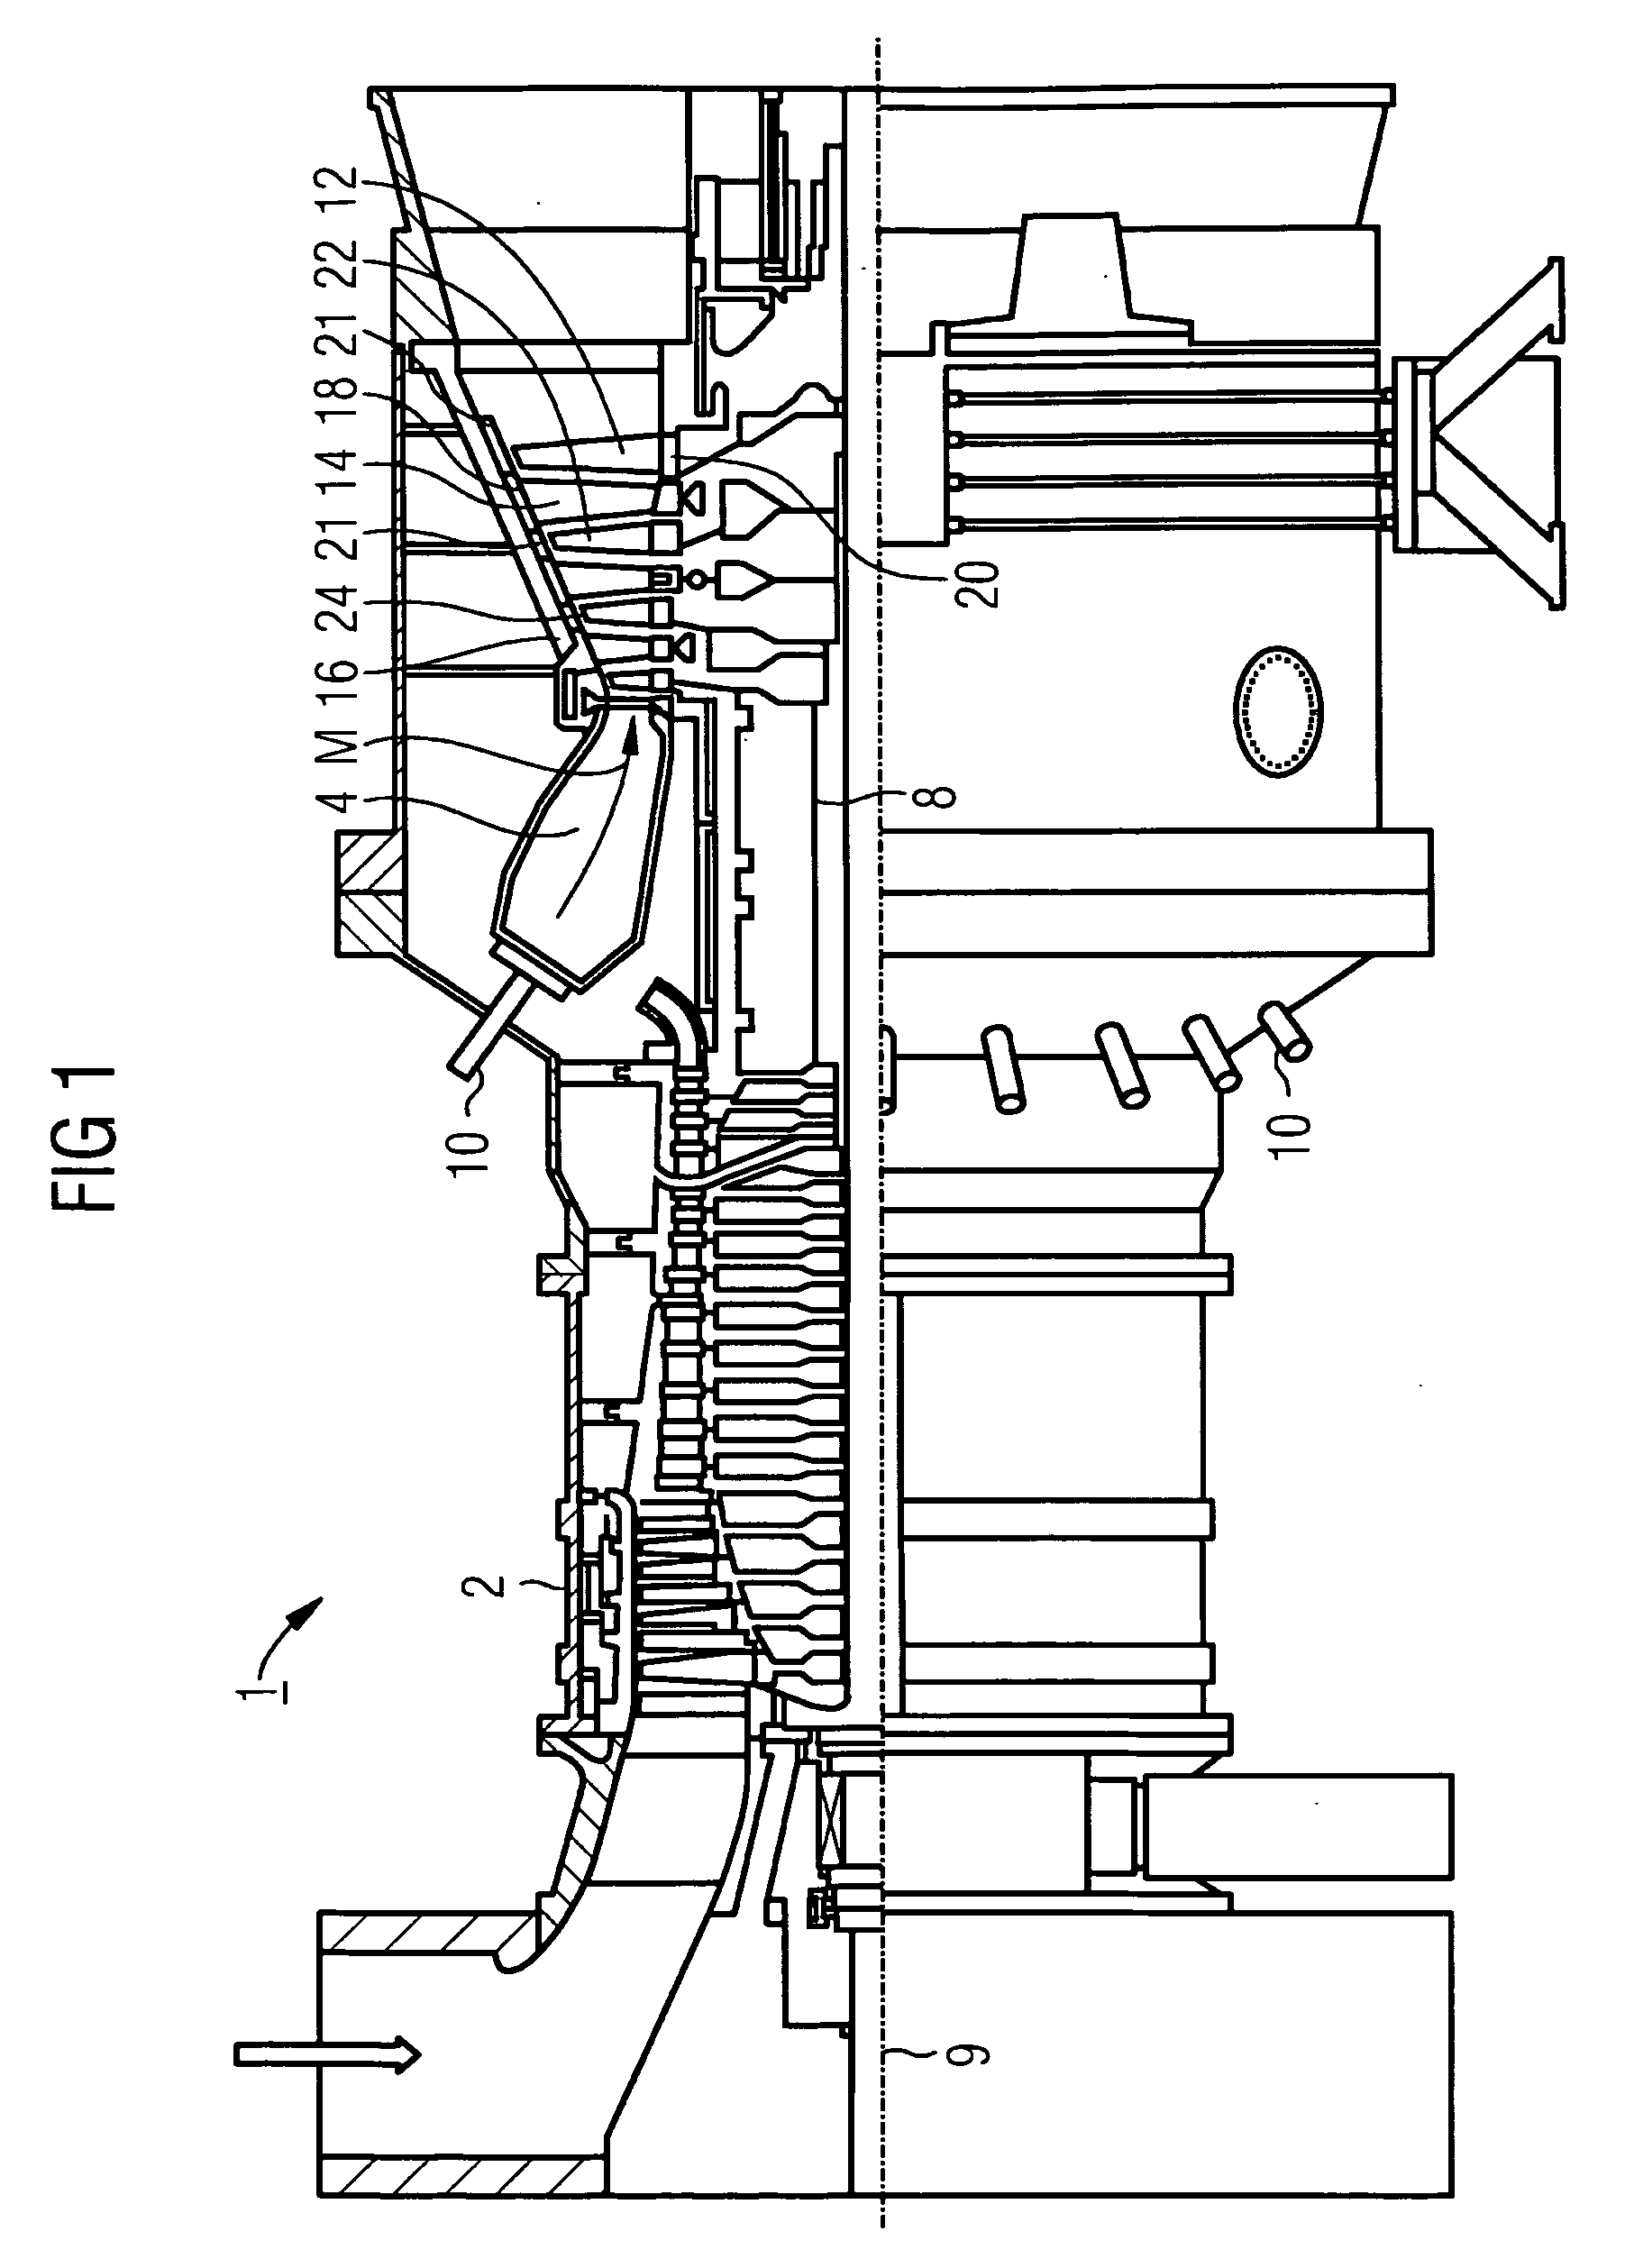 Armor-Plated Machine Components and Gas Turbines